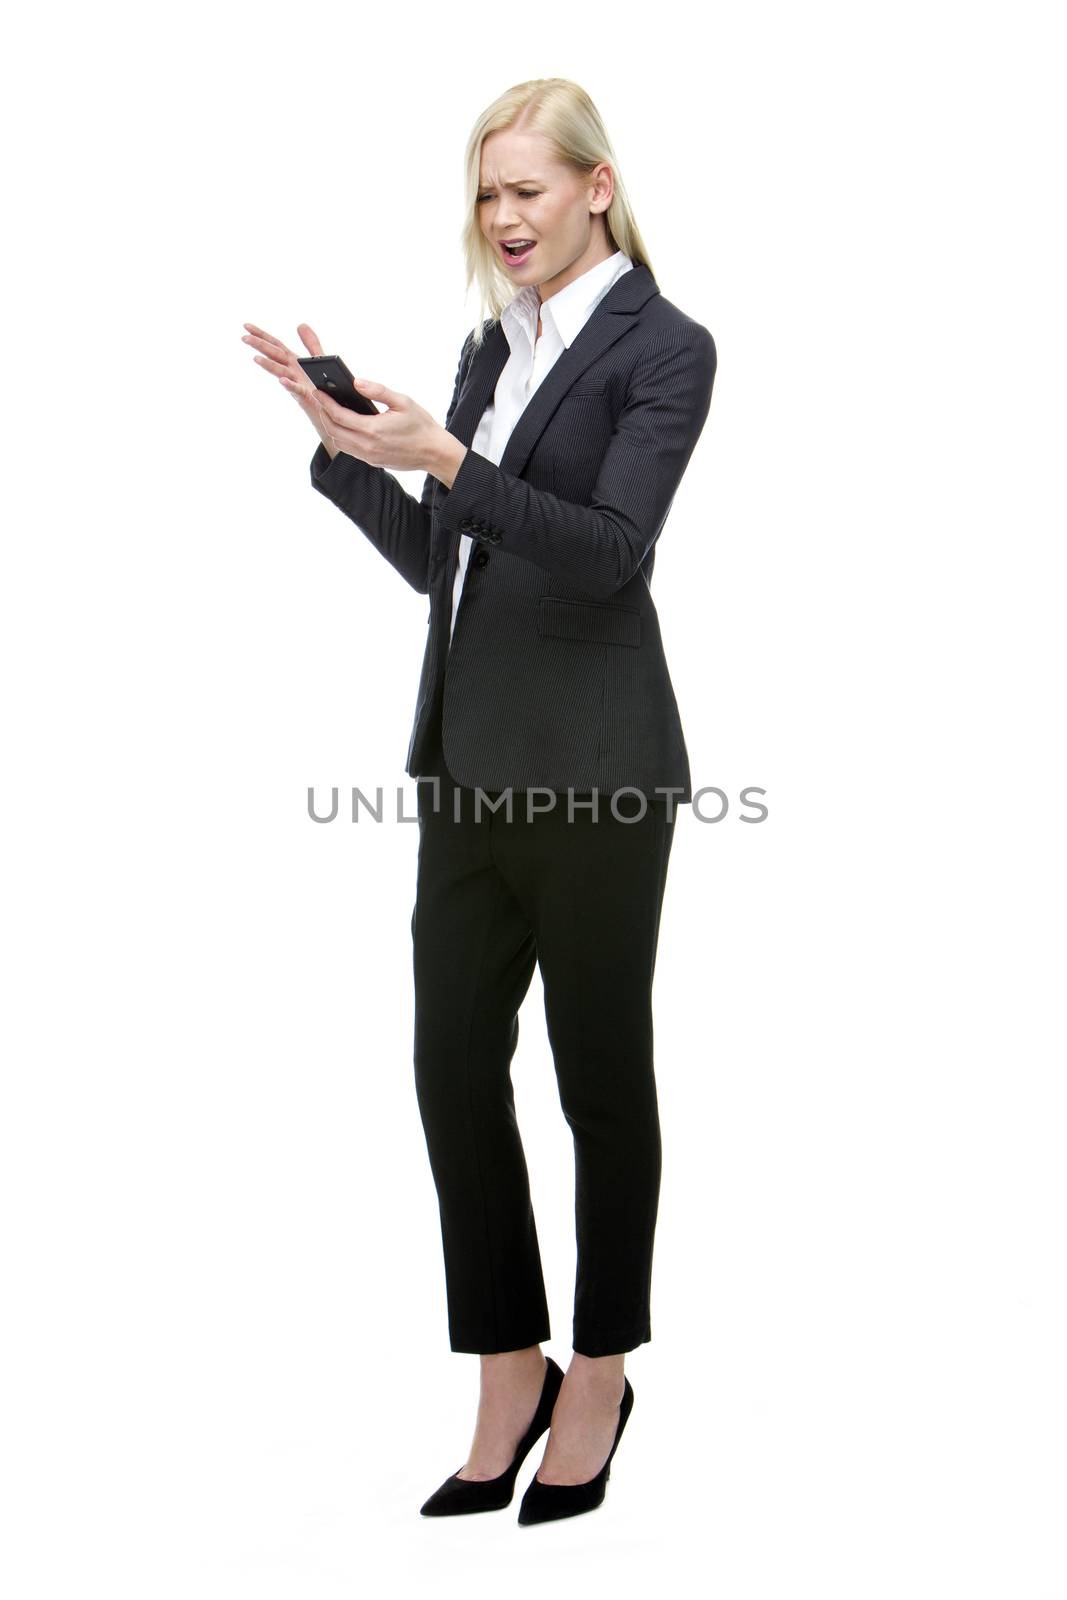 angry blonde businesswoman shouting at mobile phone